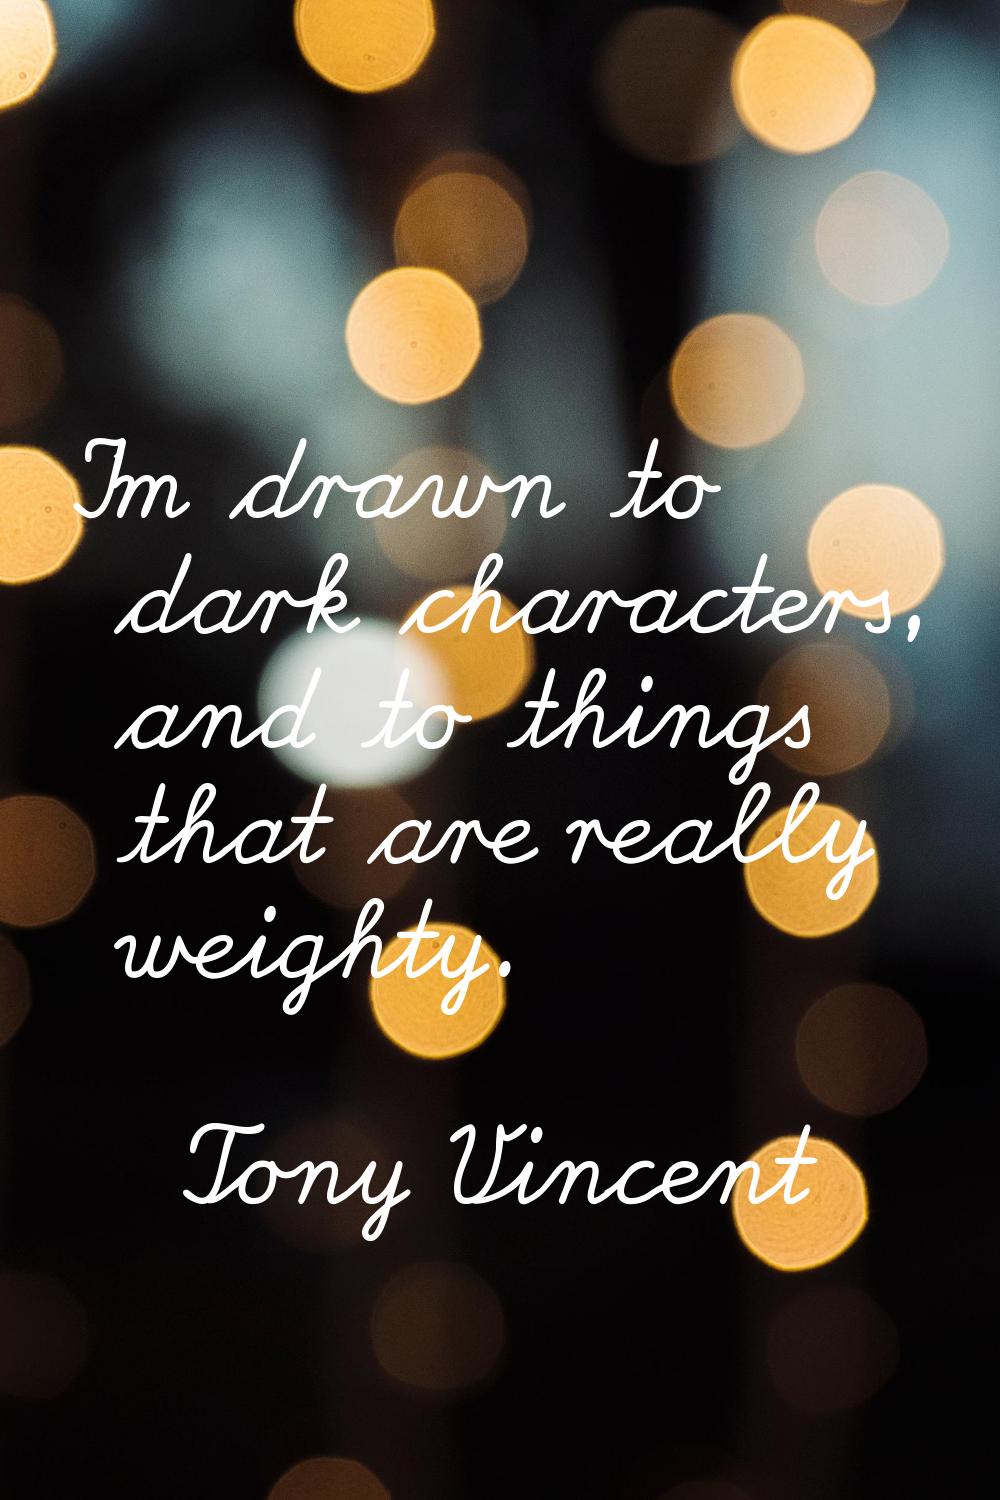 I'm drawn to dark characters, and to things that are really weighty.